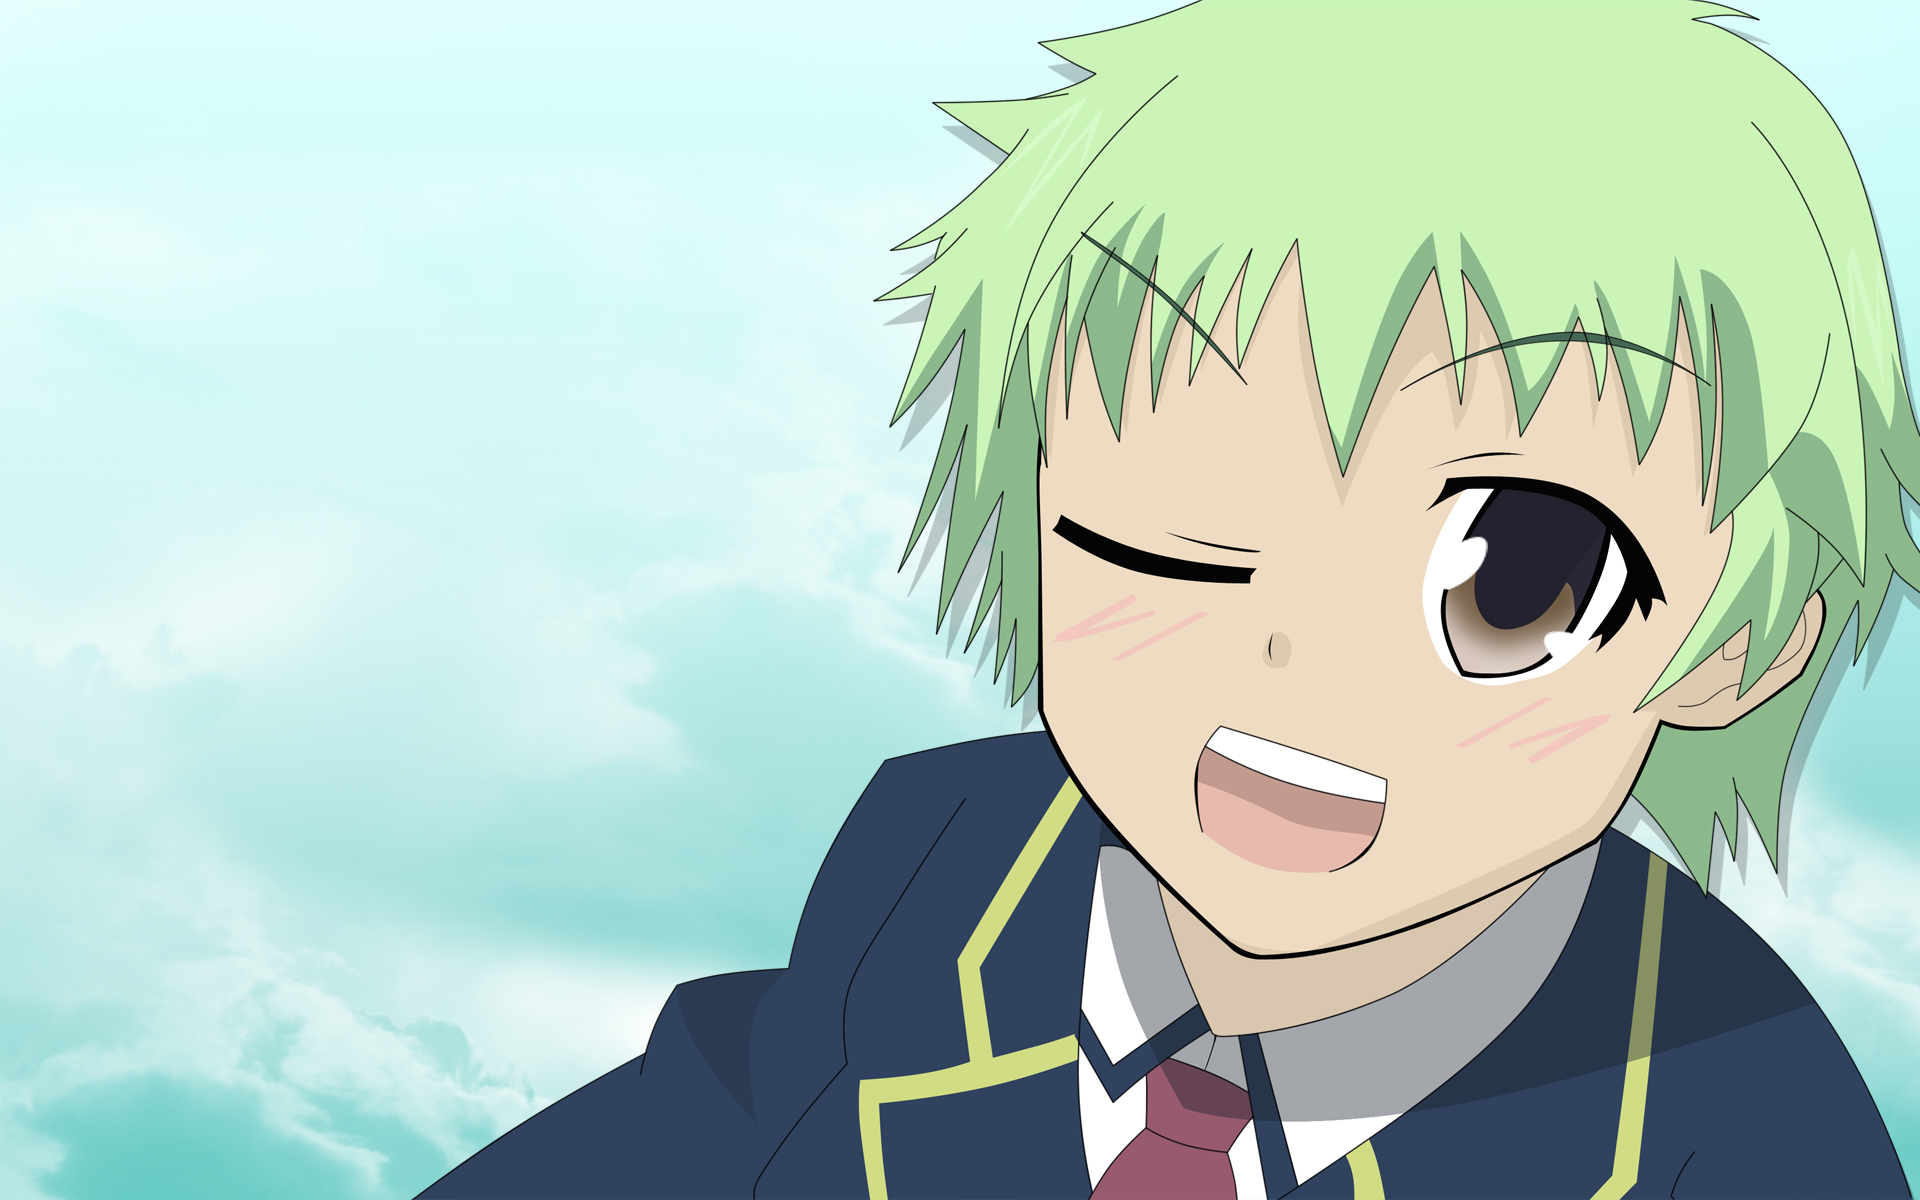 Anime Baka and Test HD Wallpaper Background Image.